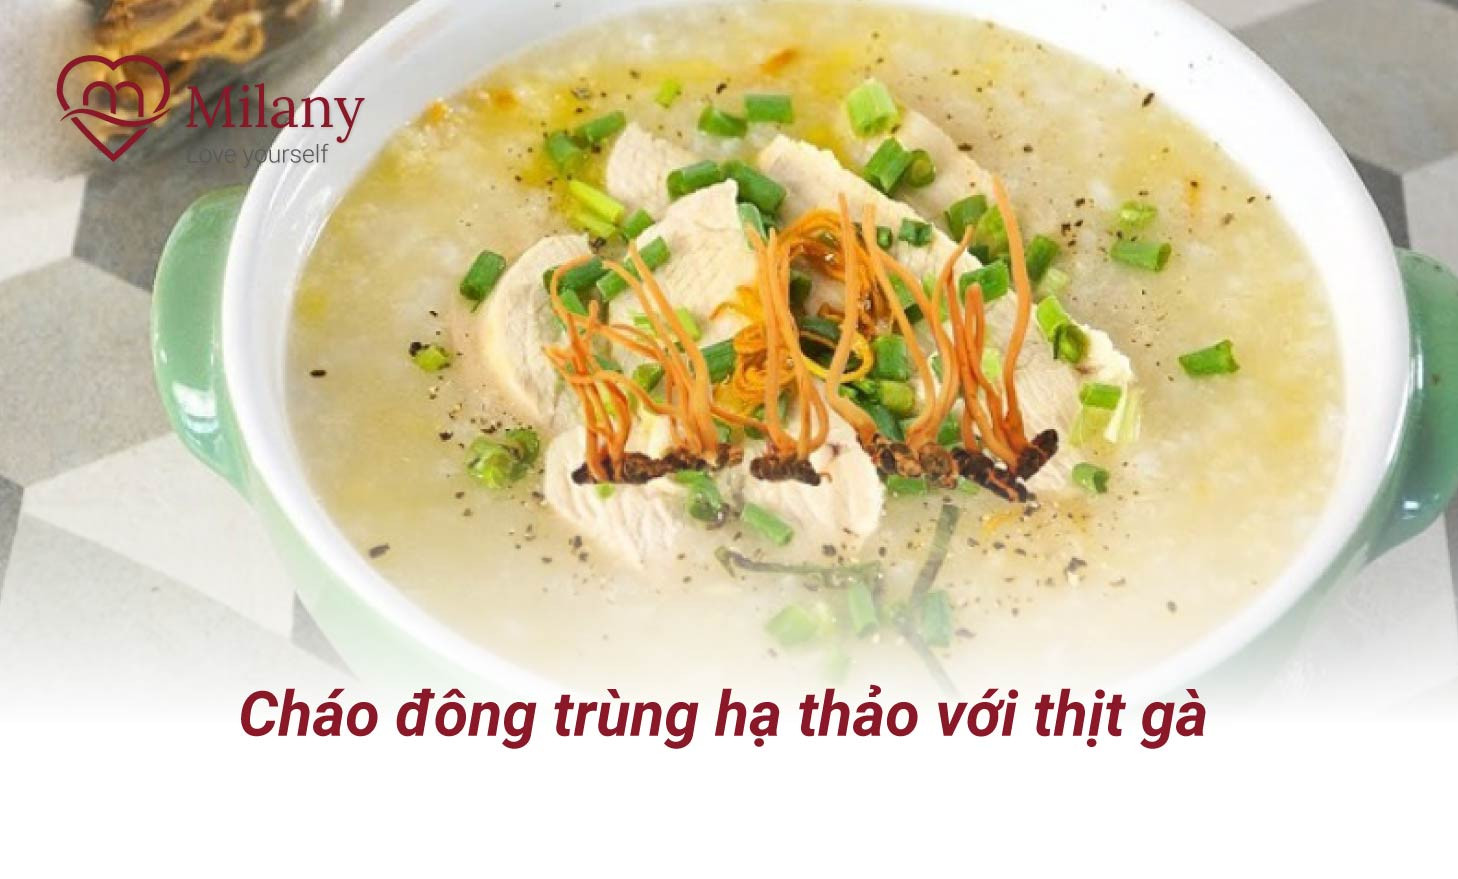 chao-dong-trung-ha-thao-voi-thit-ga